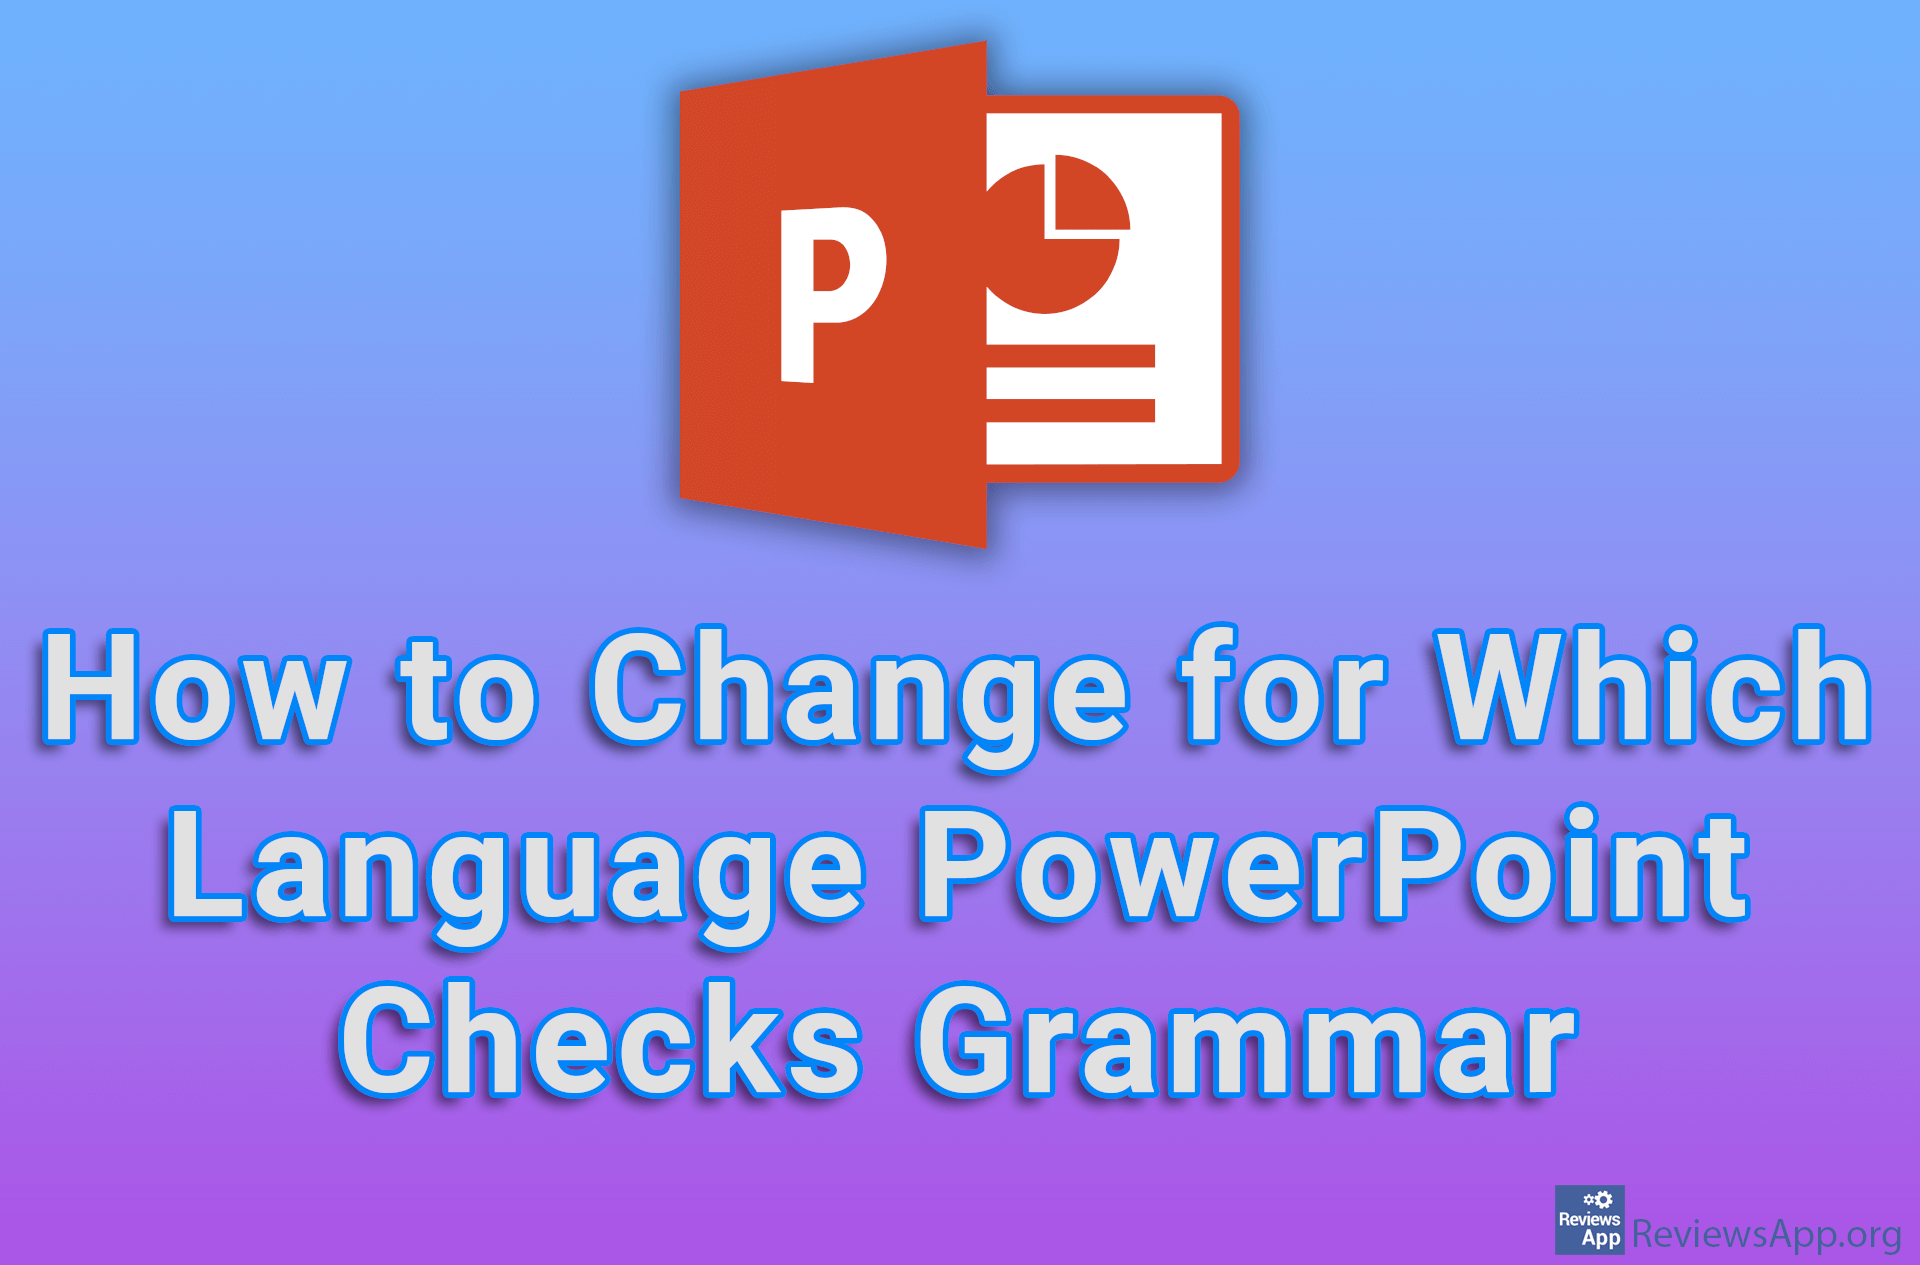 How to Change for Which Language PowerPoint Checks Grammar